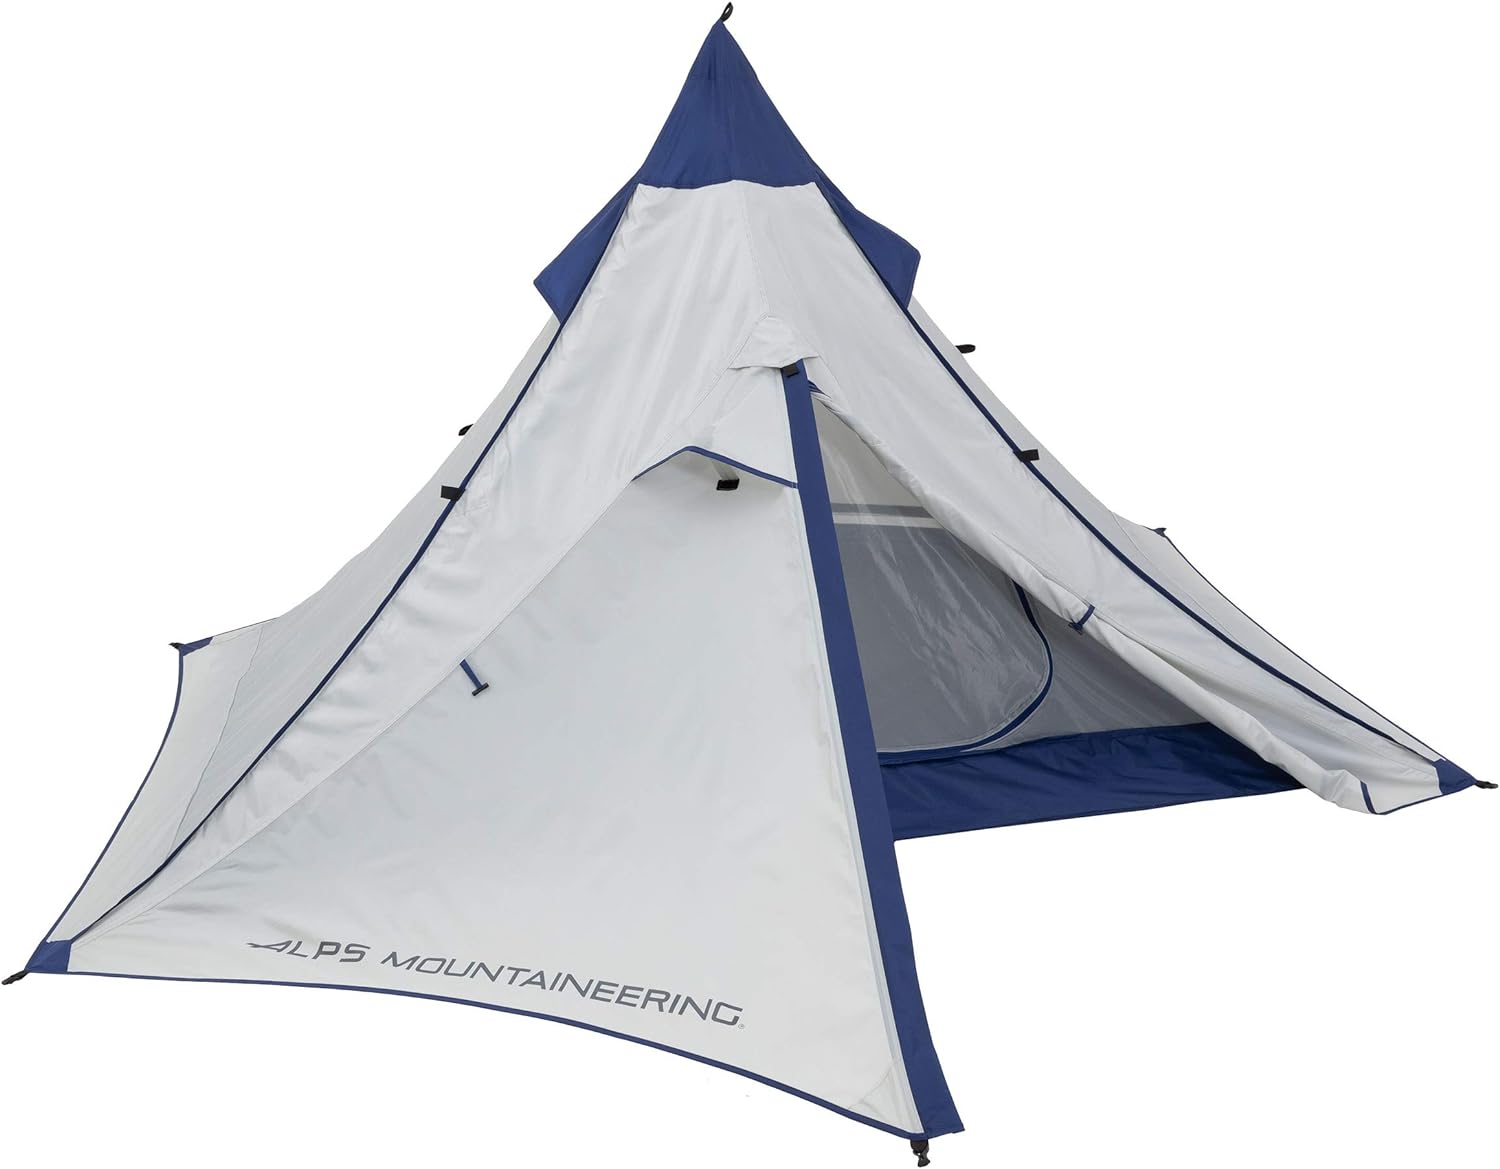 Review of ALPS Mountaineering Trail Tipi 2-Person Tent